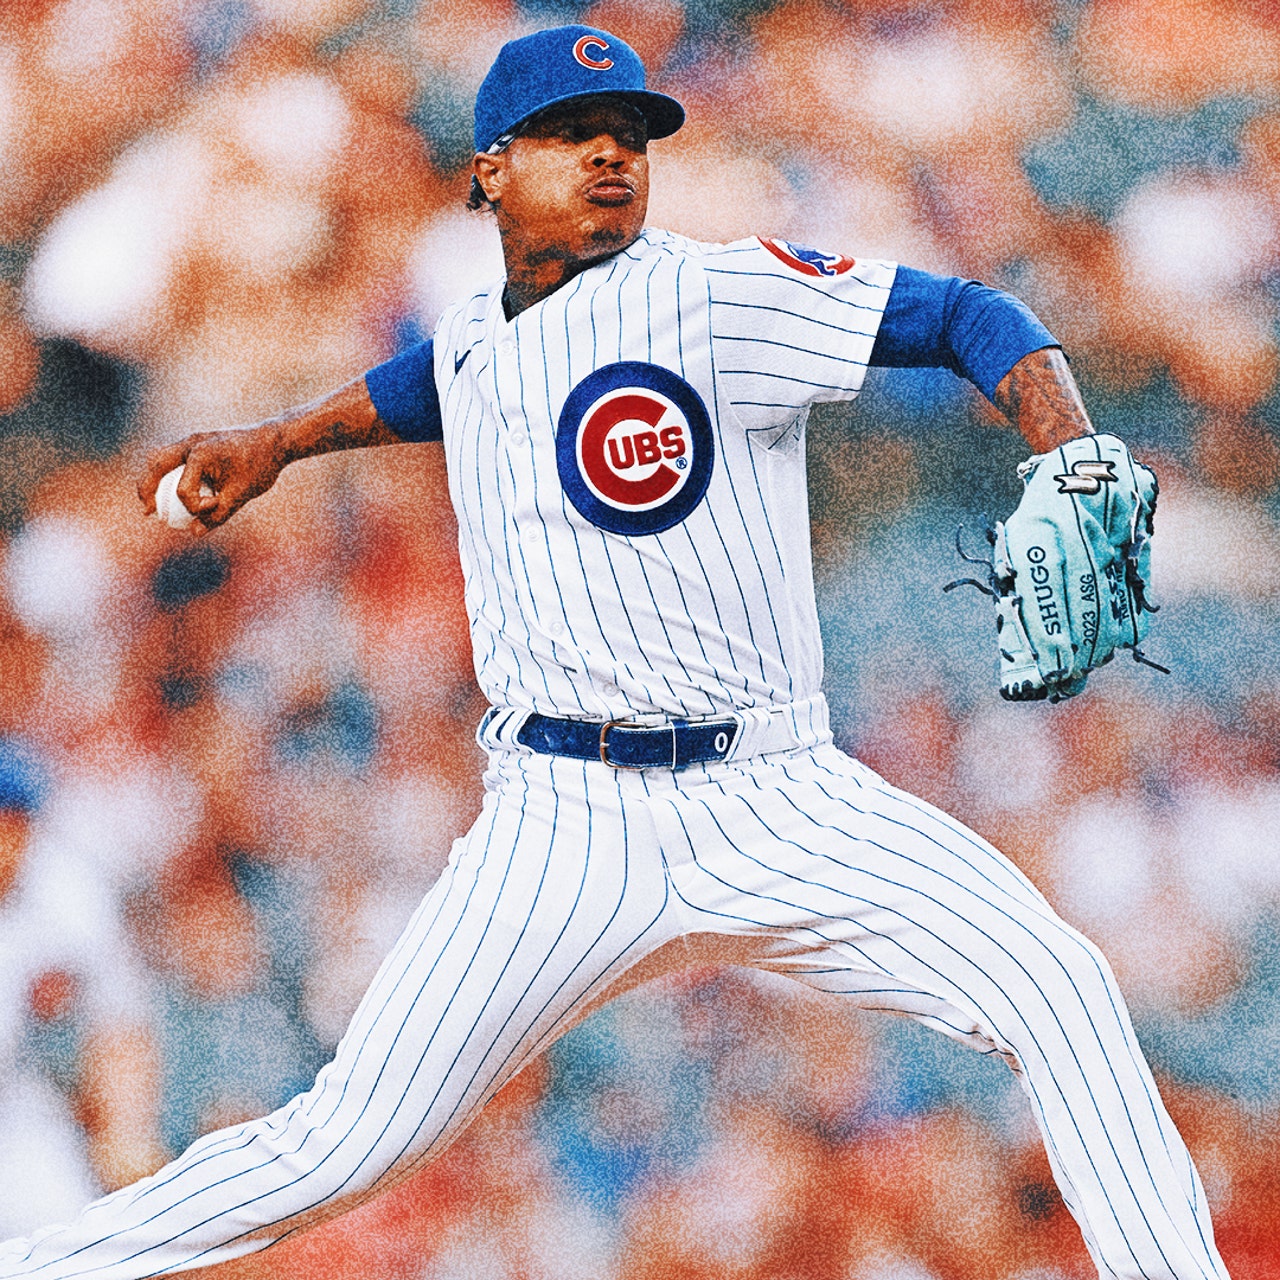 Cubs RHP Marcus Stroman has a rib cartilage fracture, no timetable for his  return